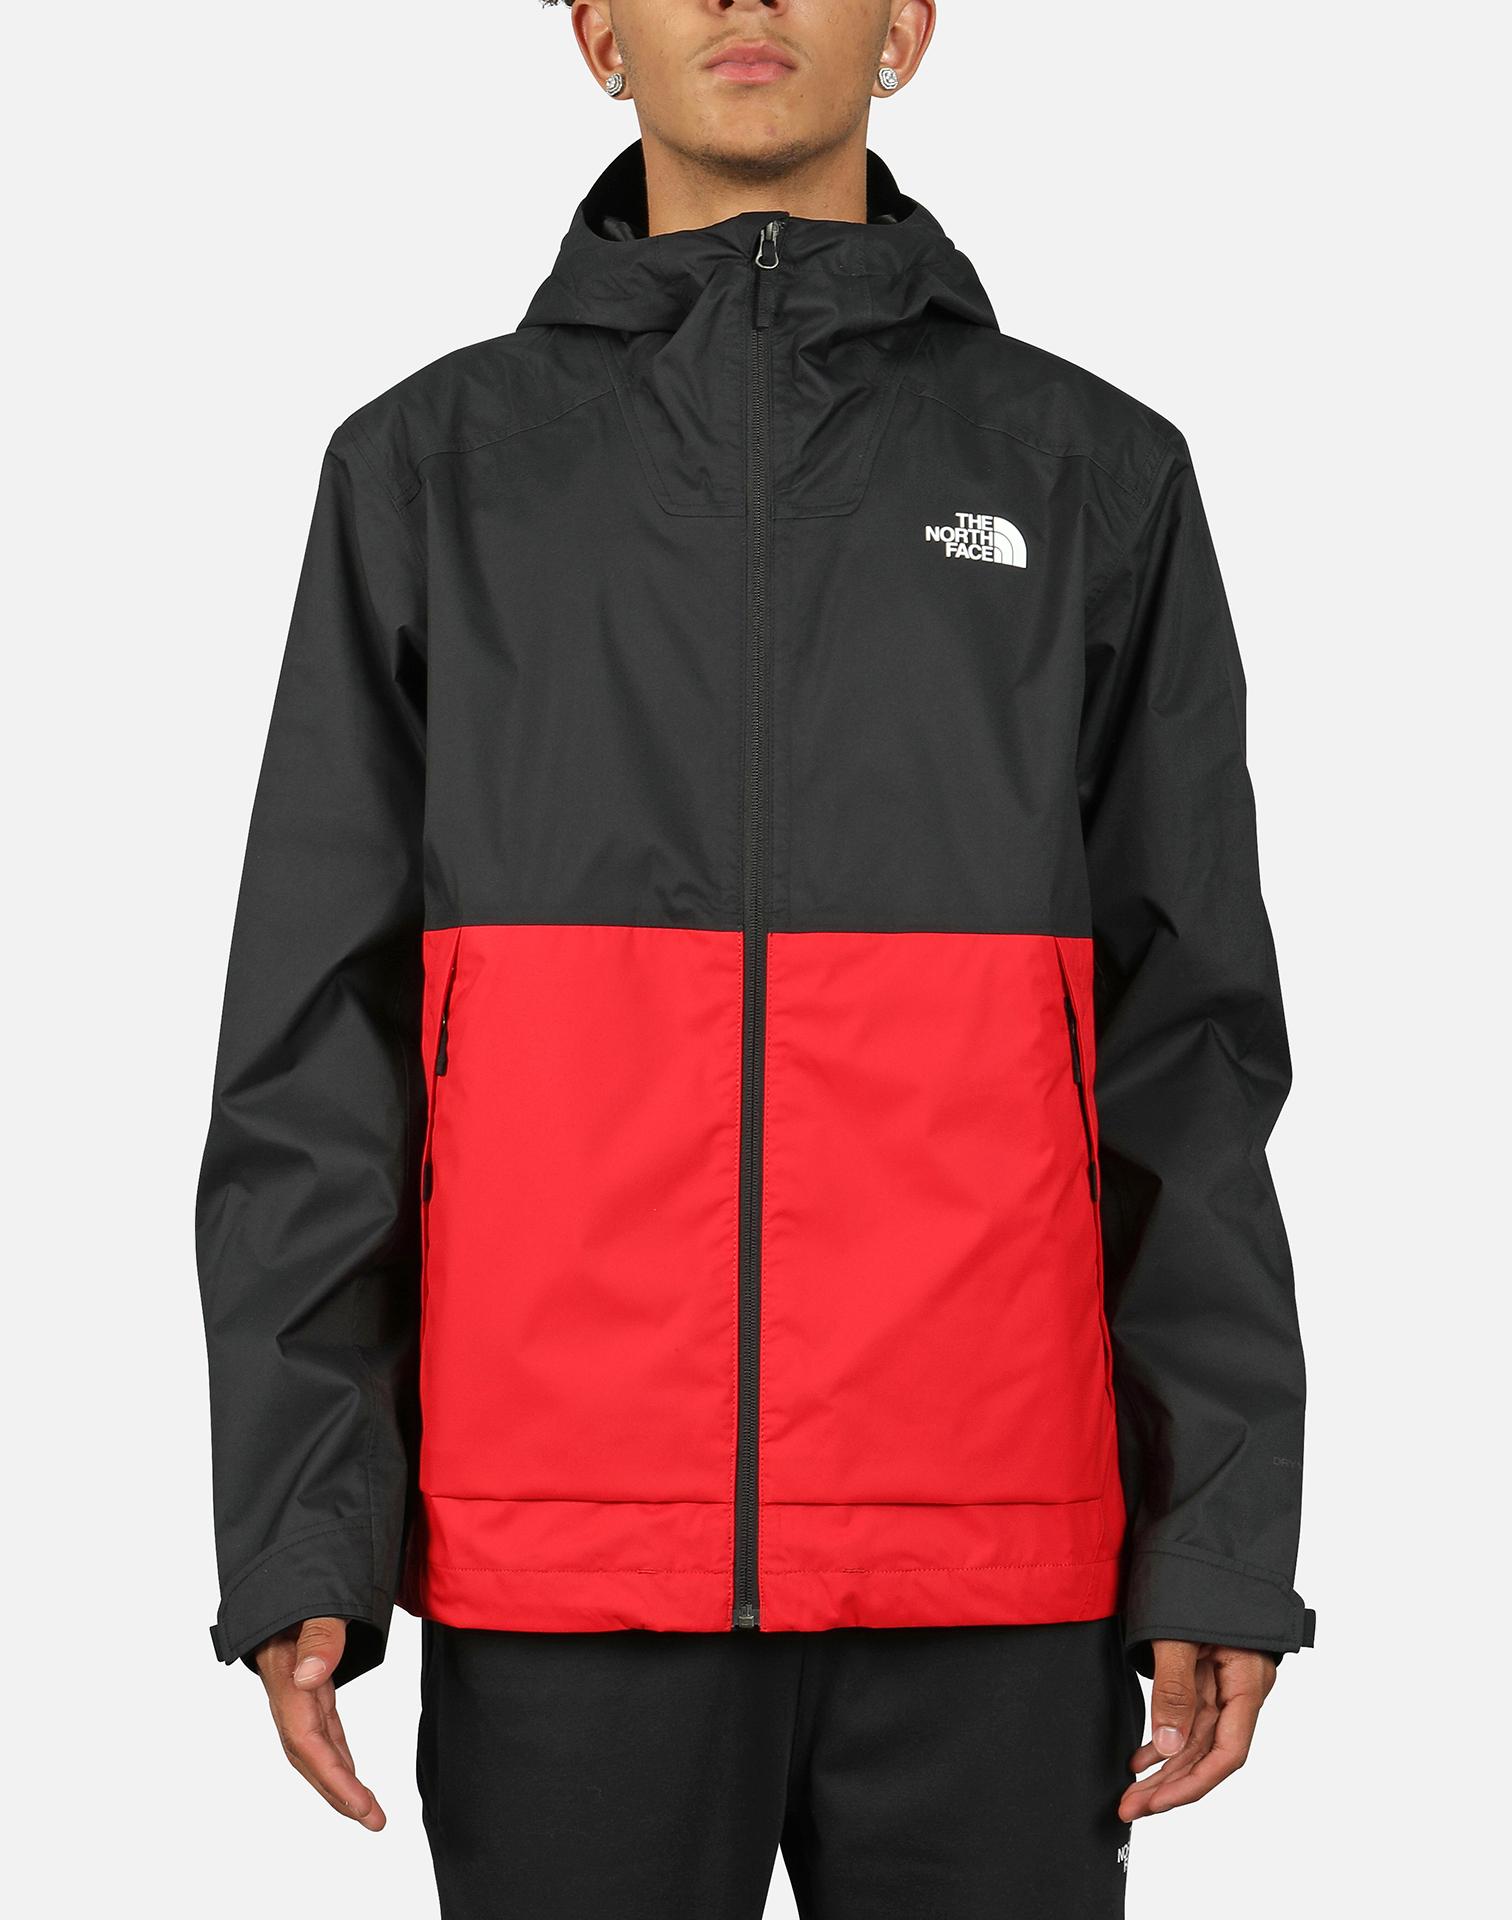 The North Face Millerton Jacket Tnf Red for Men - Lyst